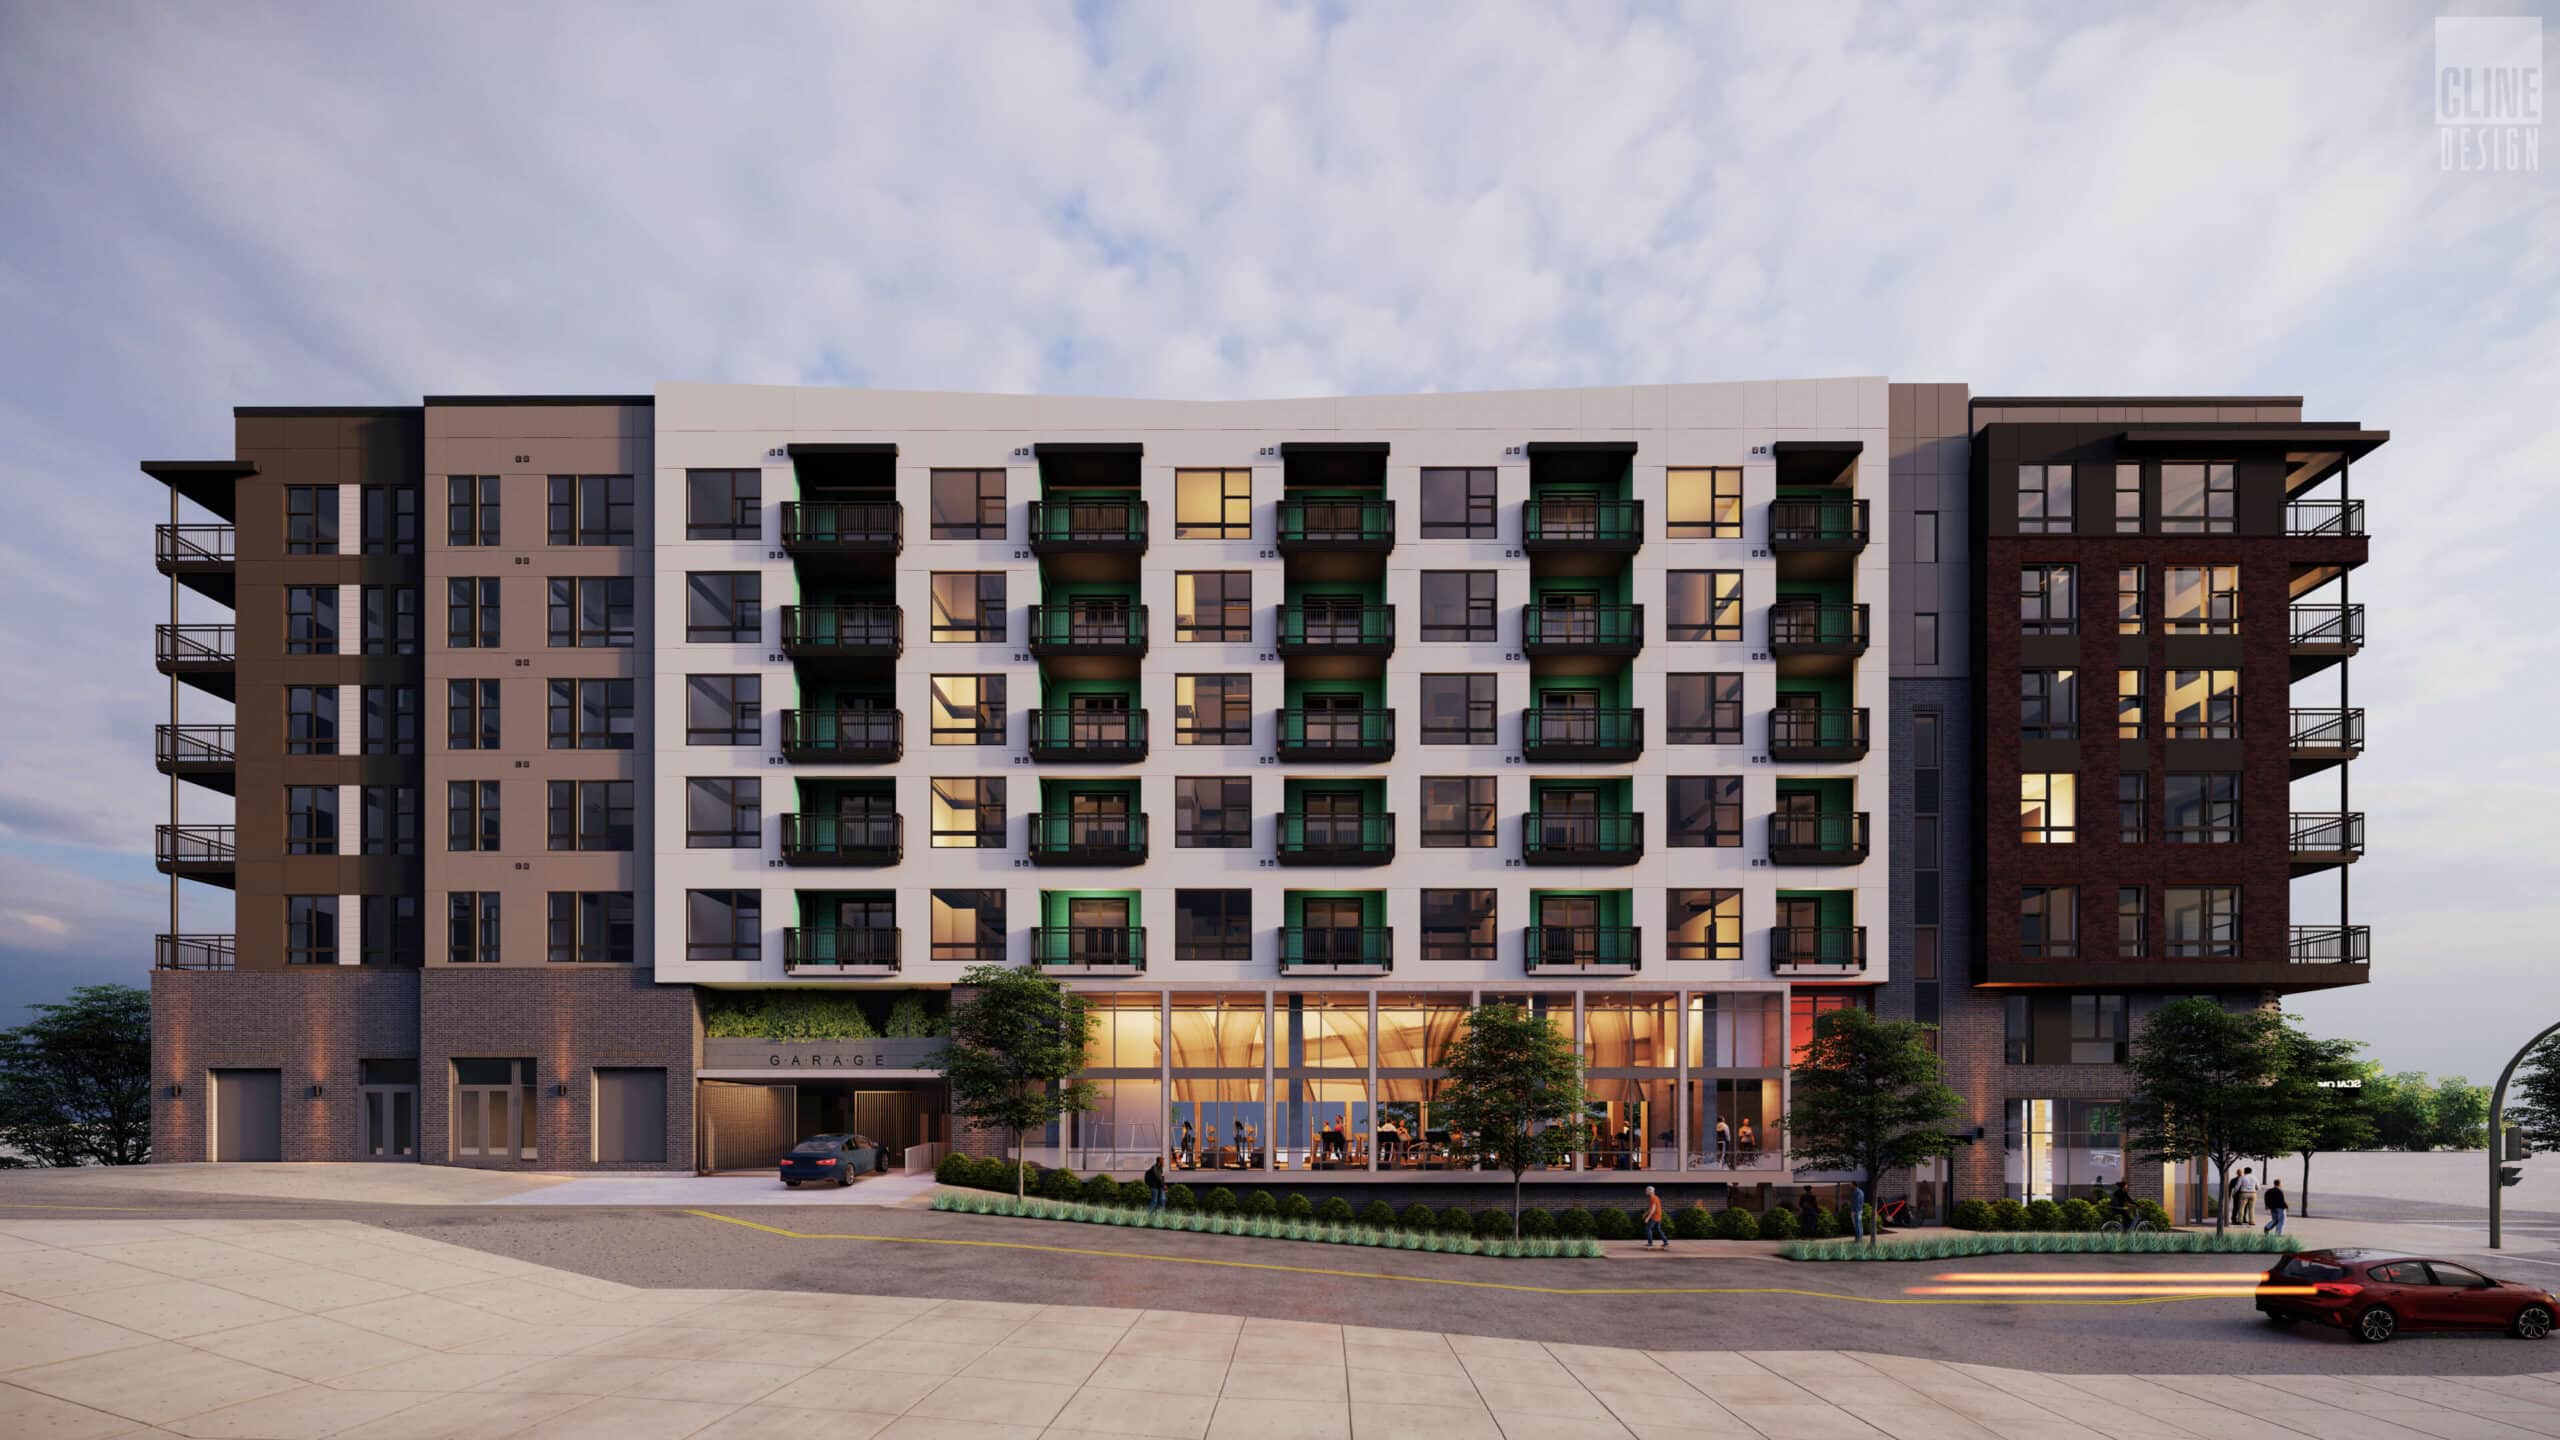 A rendering of 500 Hillsborough, emphasizing its sleek and modern architectural design, set against an urban backdrop